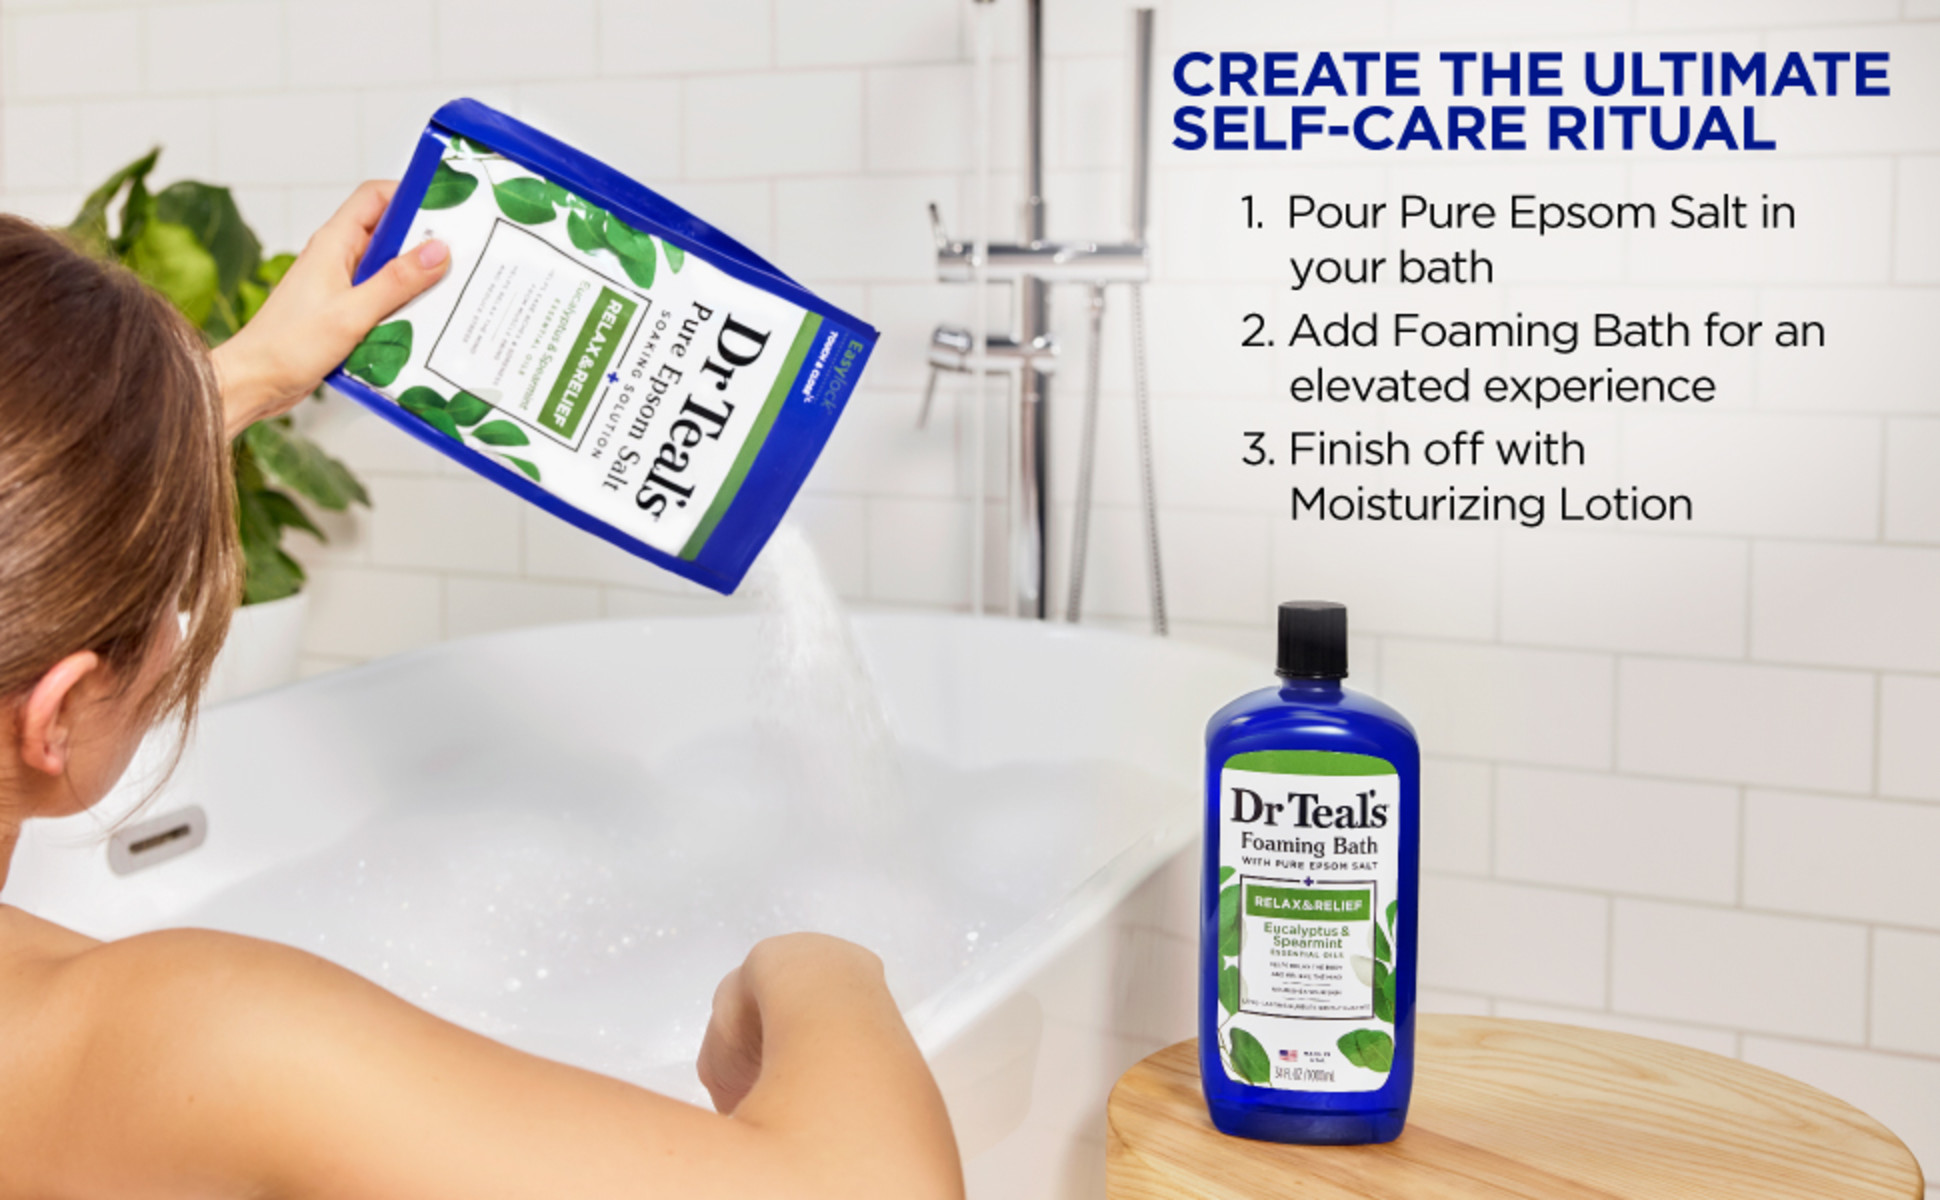 Dr Teal's Foaming Bath with Pure Epsom Salt, Relax & Relief with Eucalyptus  & Spearmint, 34 fl oz (Packaging May Vary)